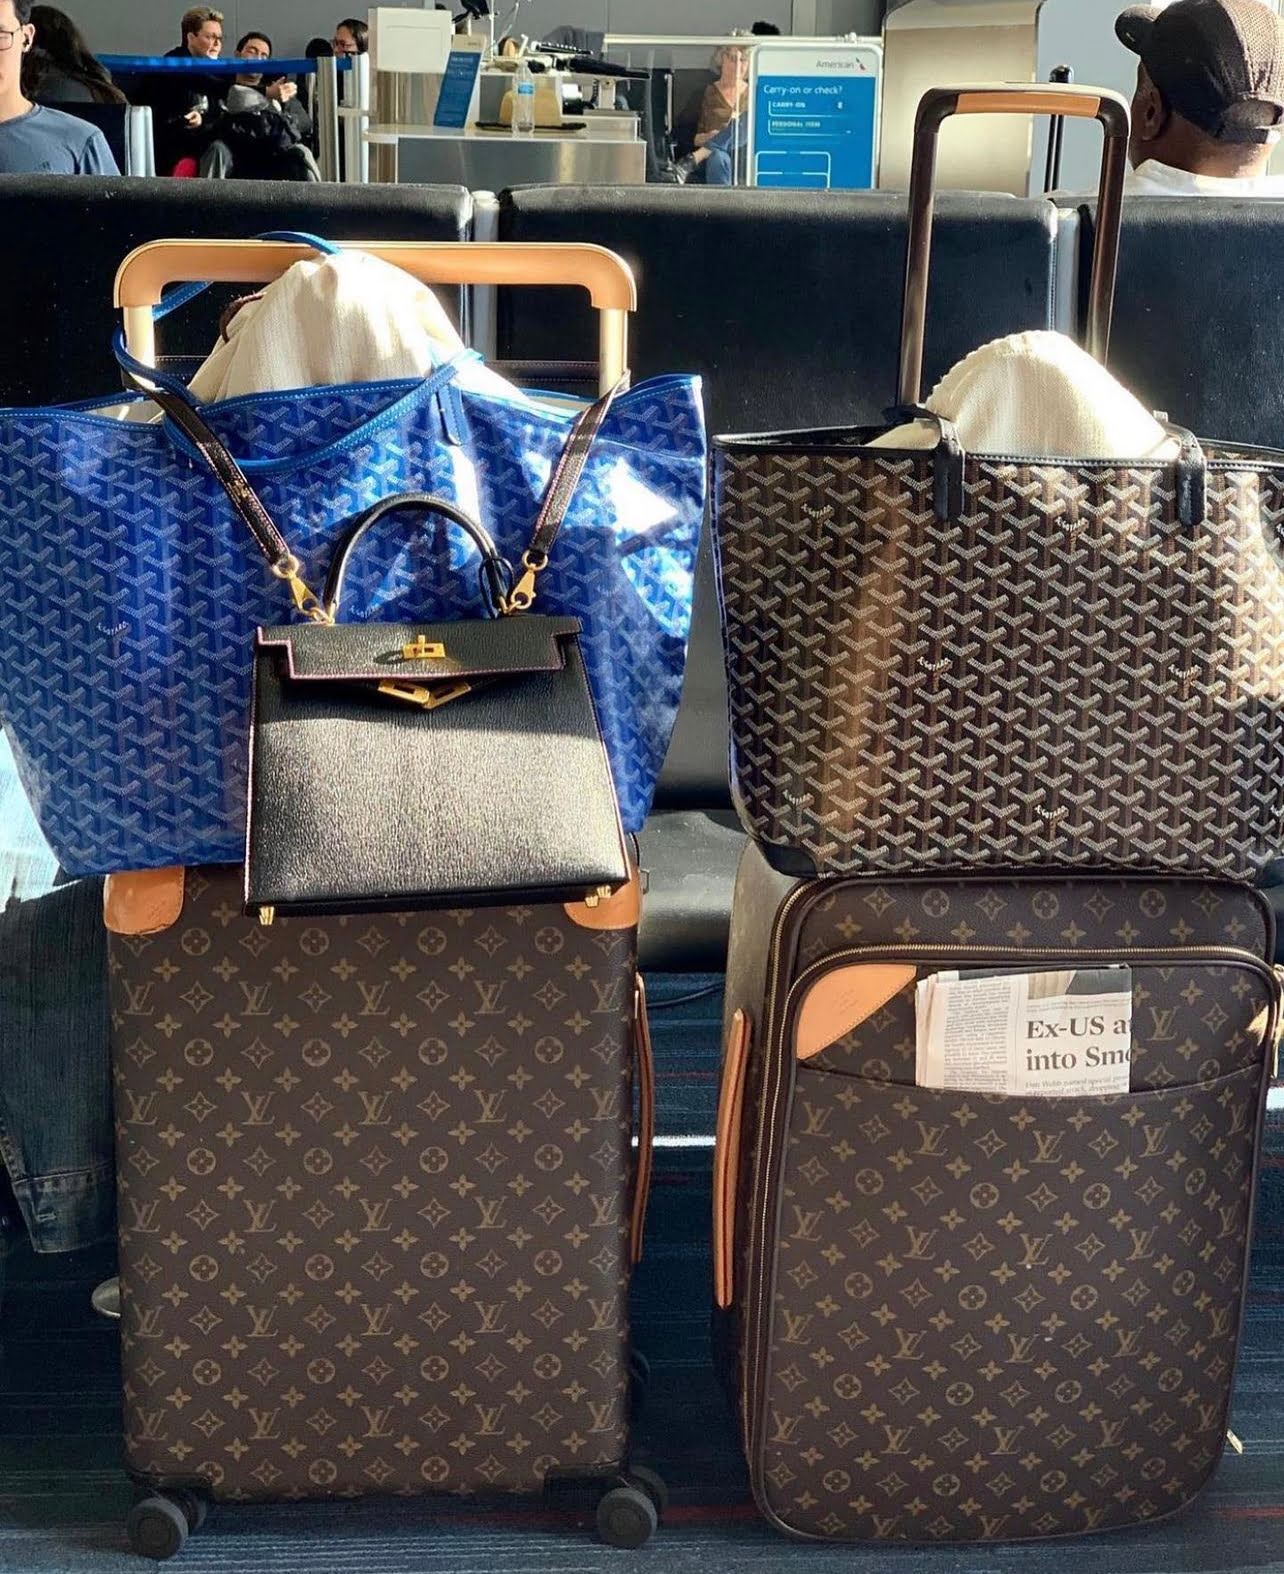 The 11 Coolest Pieces of Designer Luggage Money Can Buy #goyard